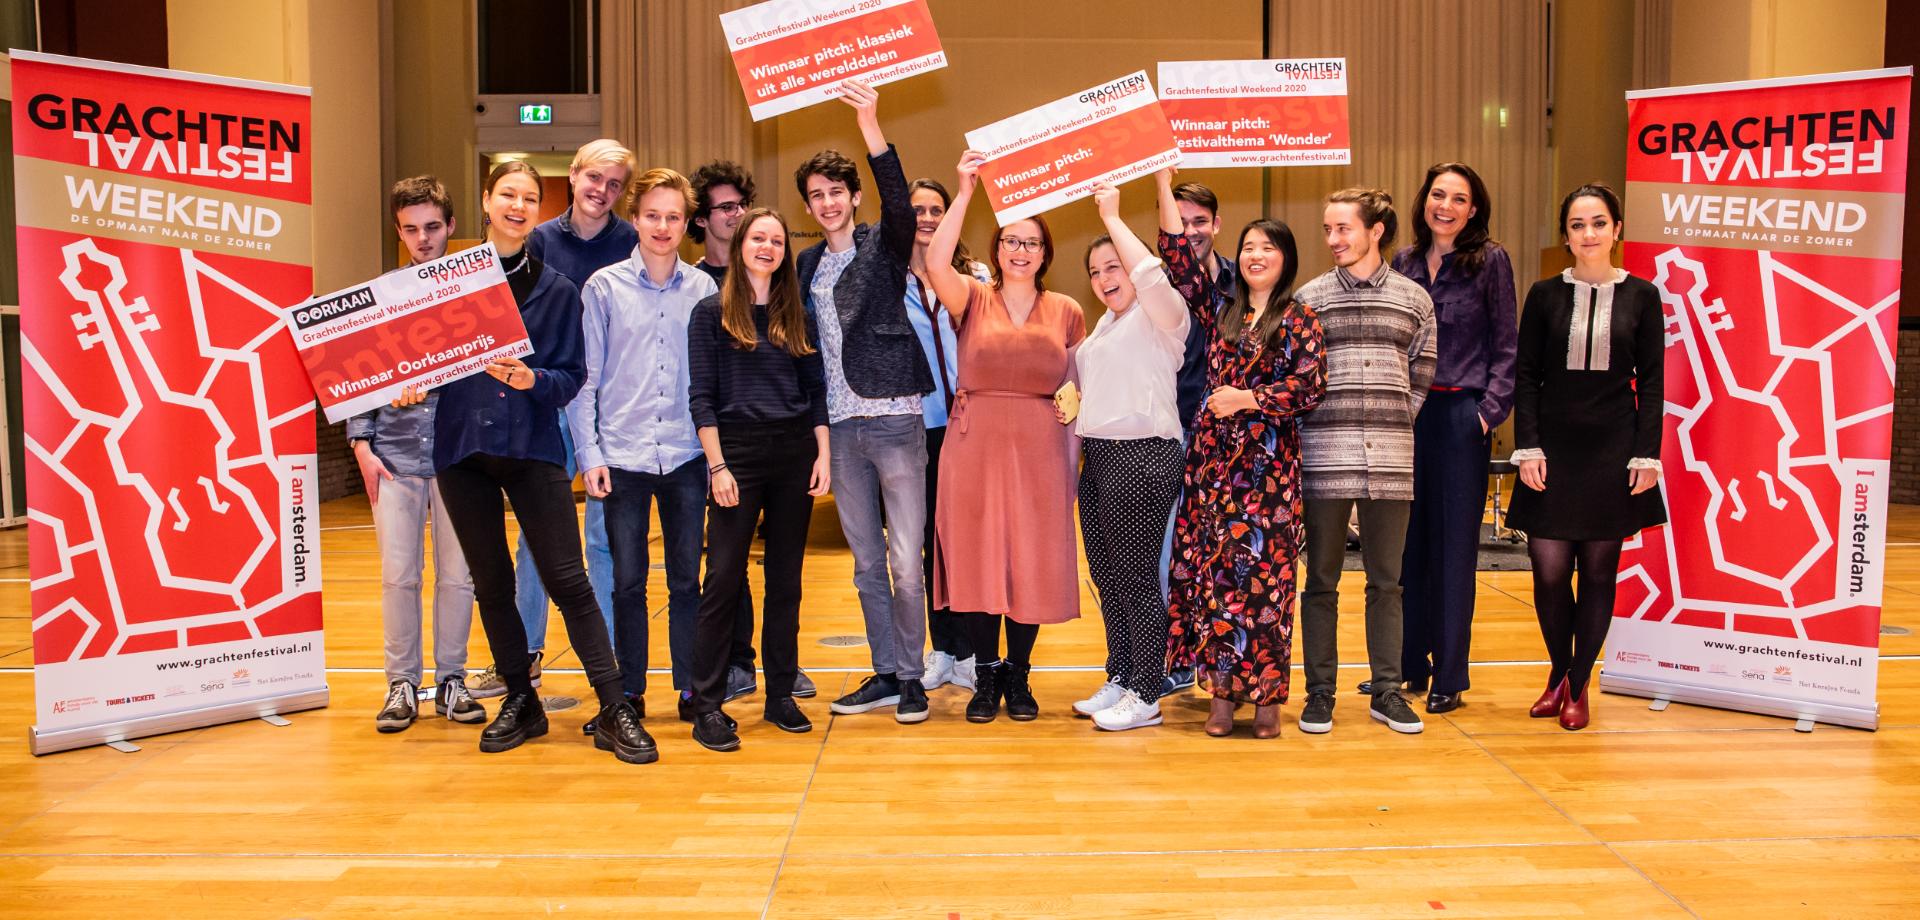 And the winners of the Grachtenfestival Weekend pitches 2020 are: